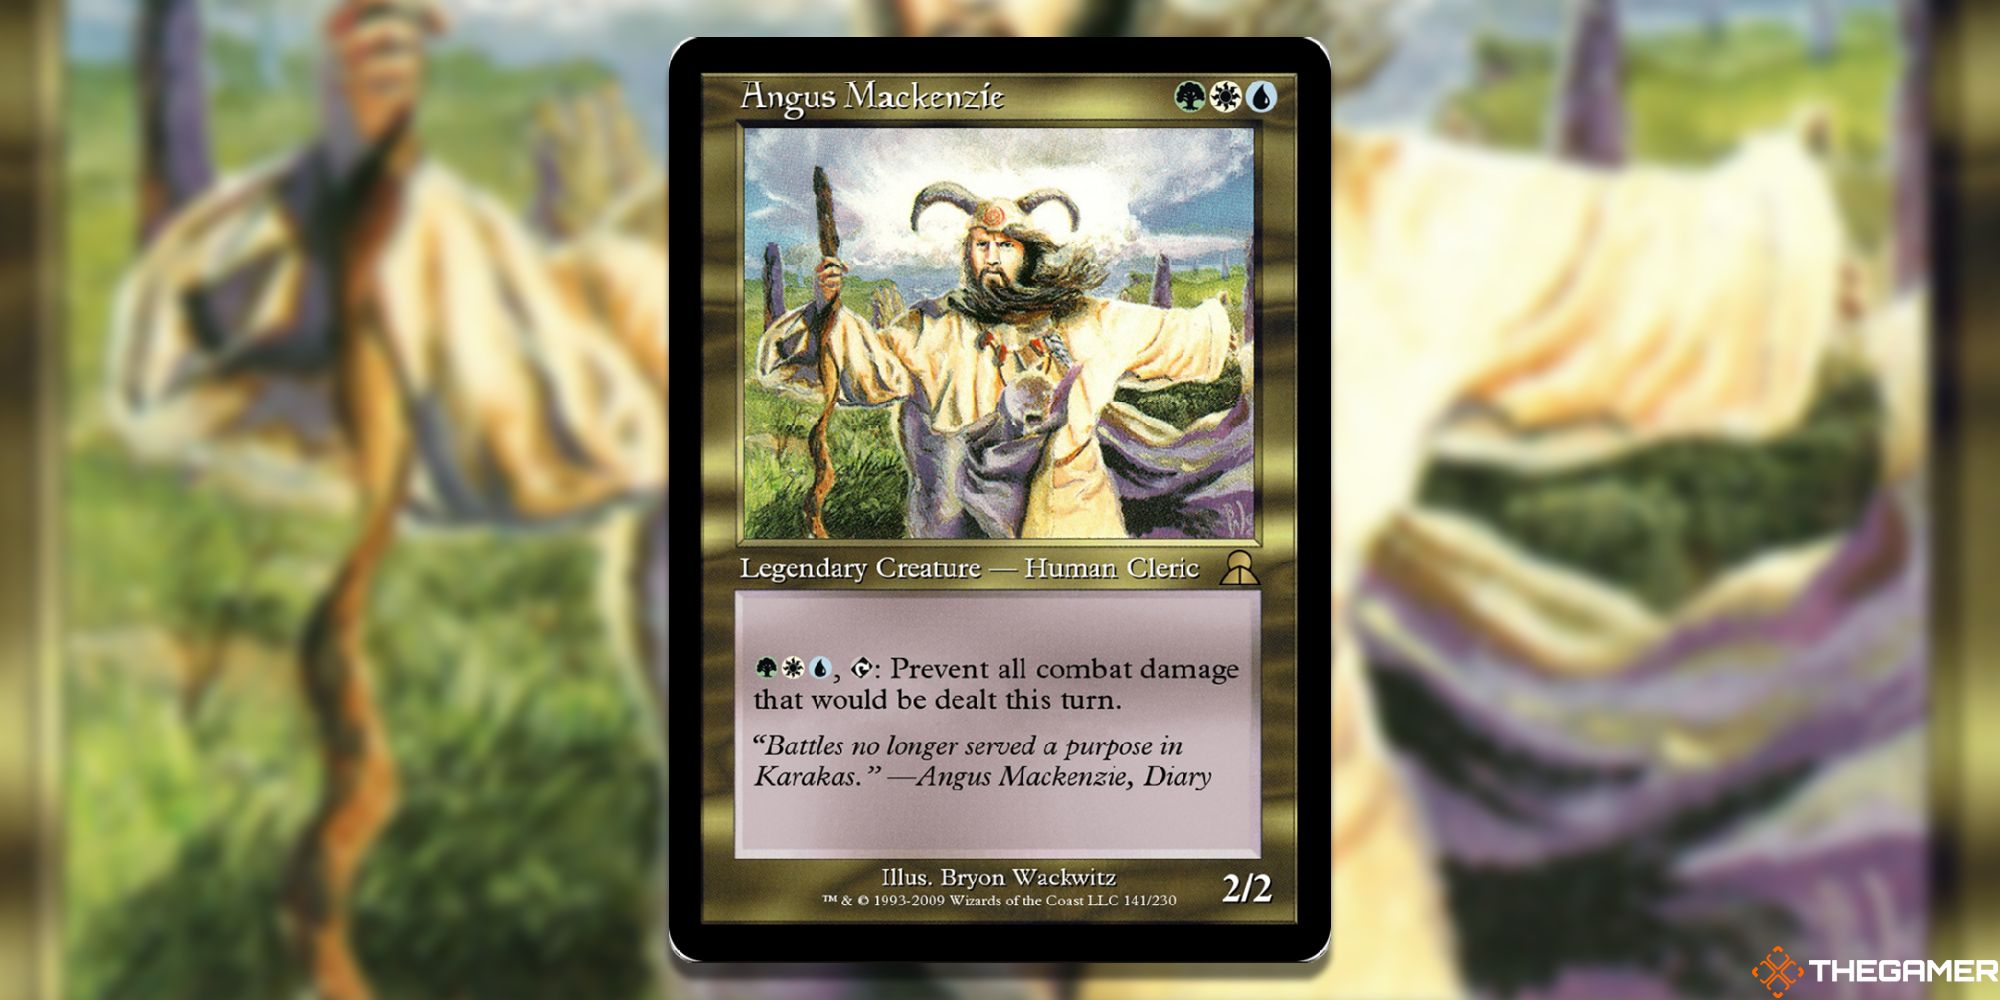 Image of the Angus Mackenzie card in Magic: The Gathering, with art by Bryon Wackwitz